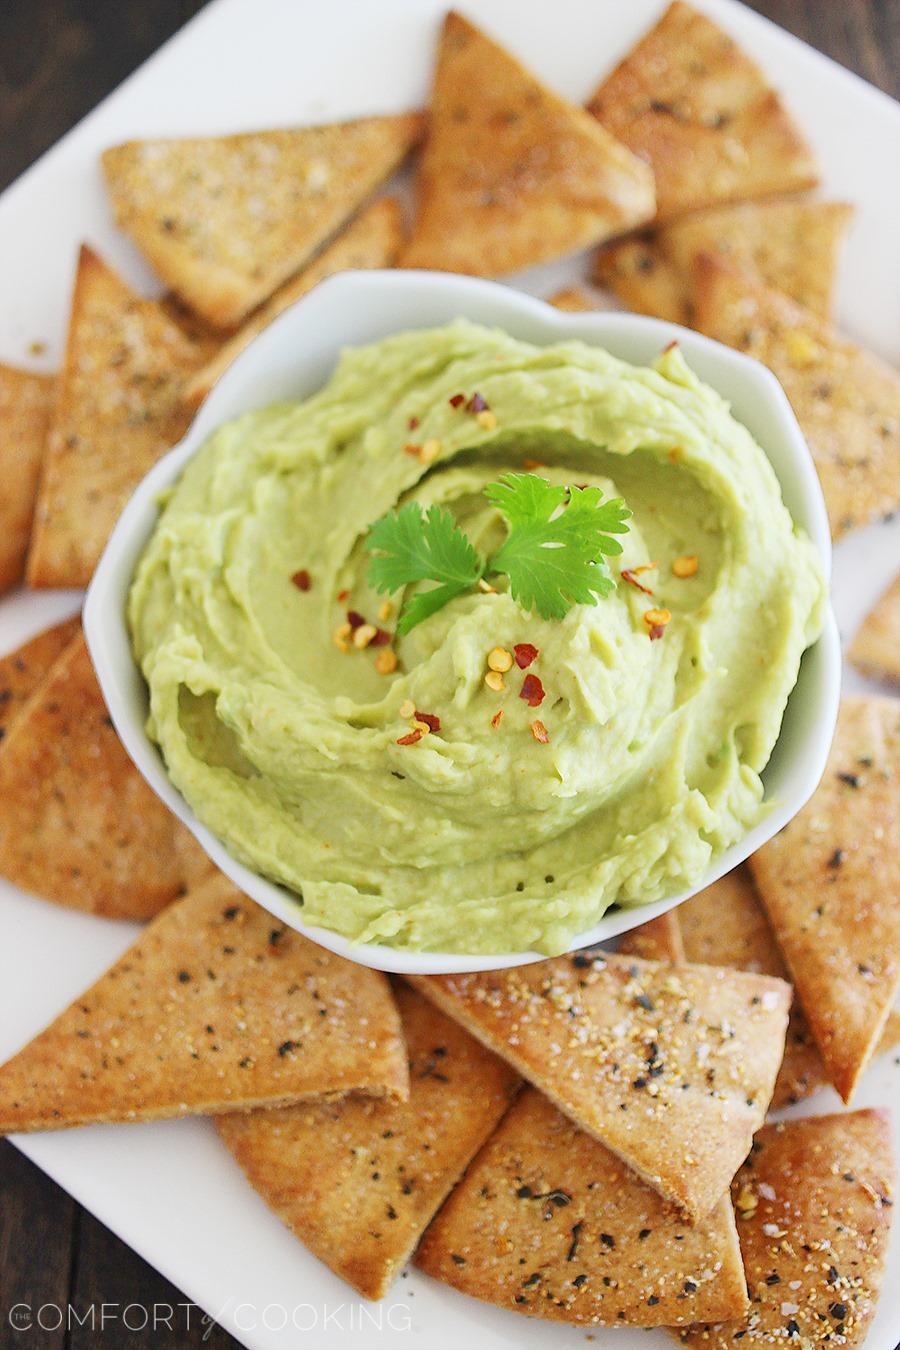 Avocado Hummus + Whole Wheat Pita Chips – Smooth, creamy white bean avocado hummus and homemade pita chips make this the perfect party snack! | thecomfortofcooking.com